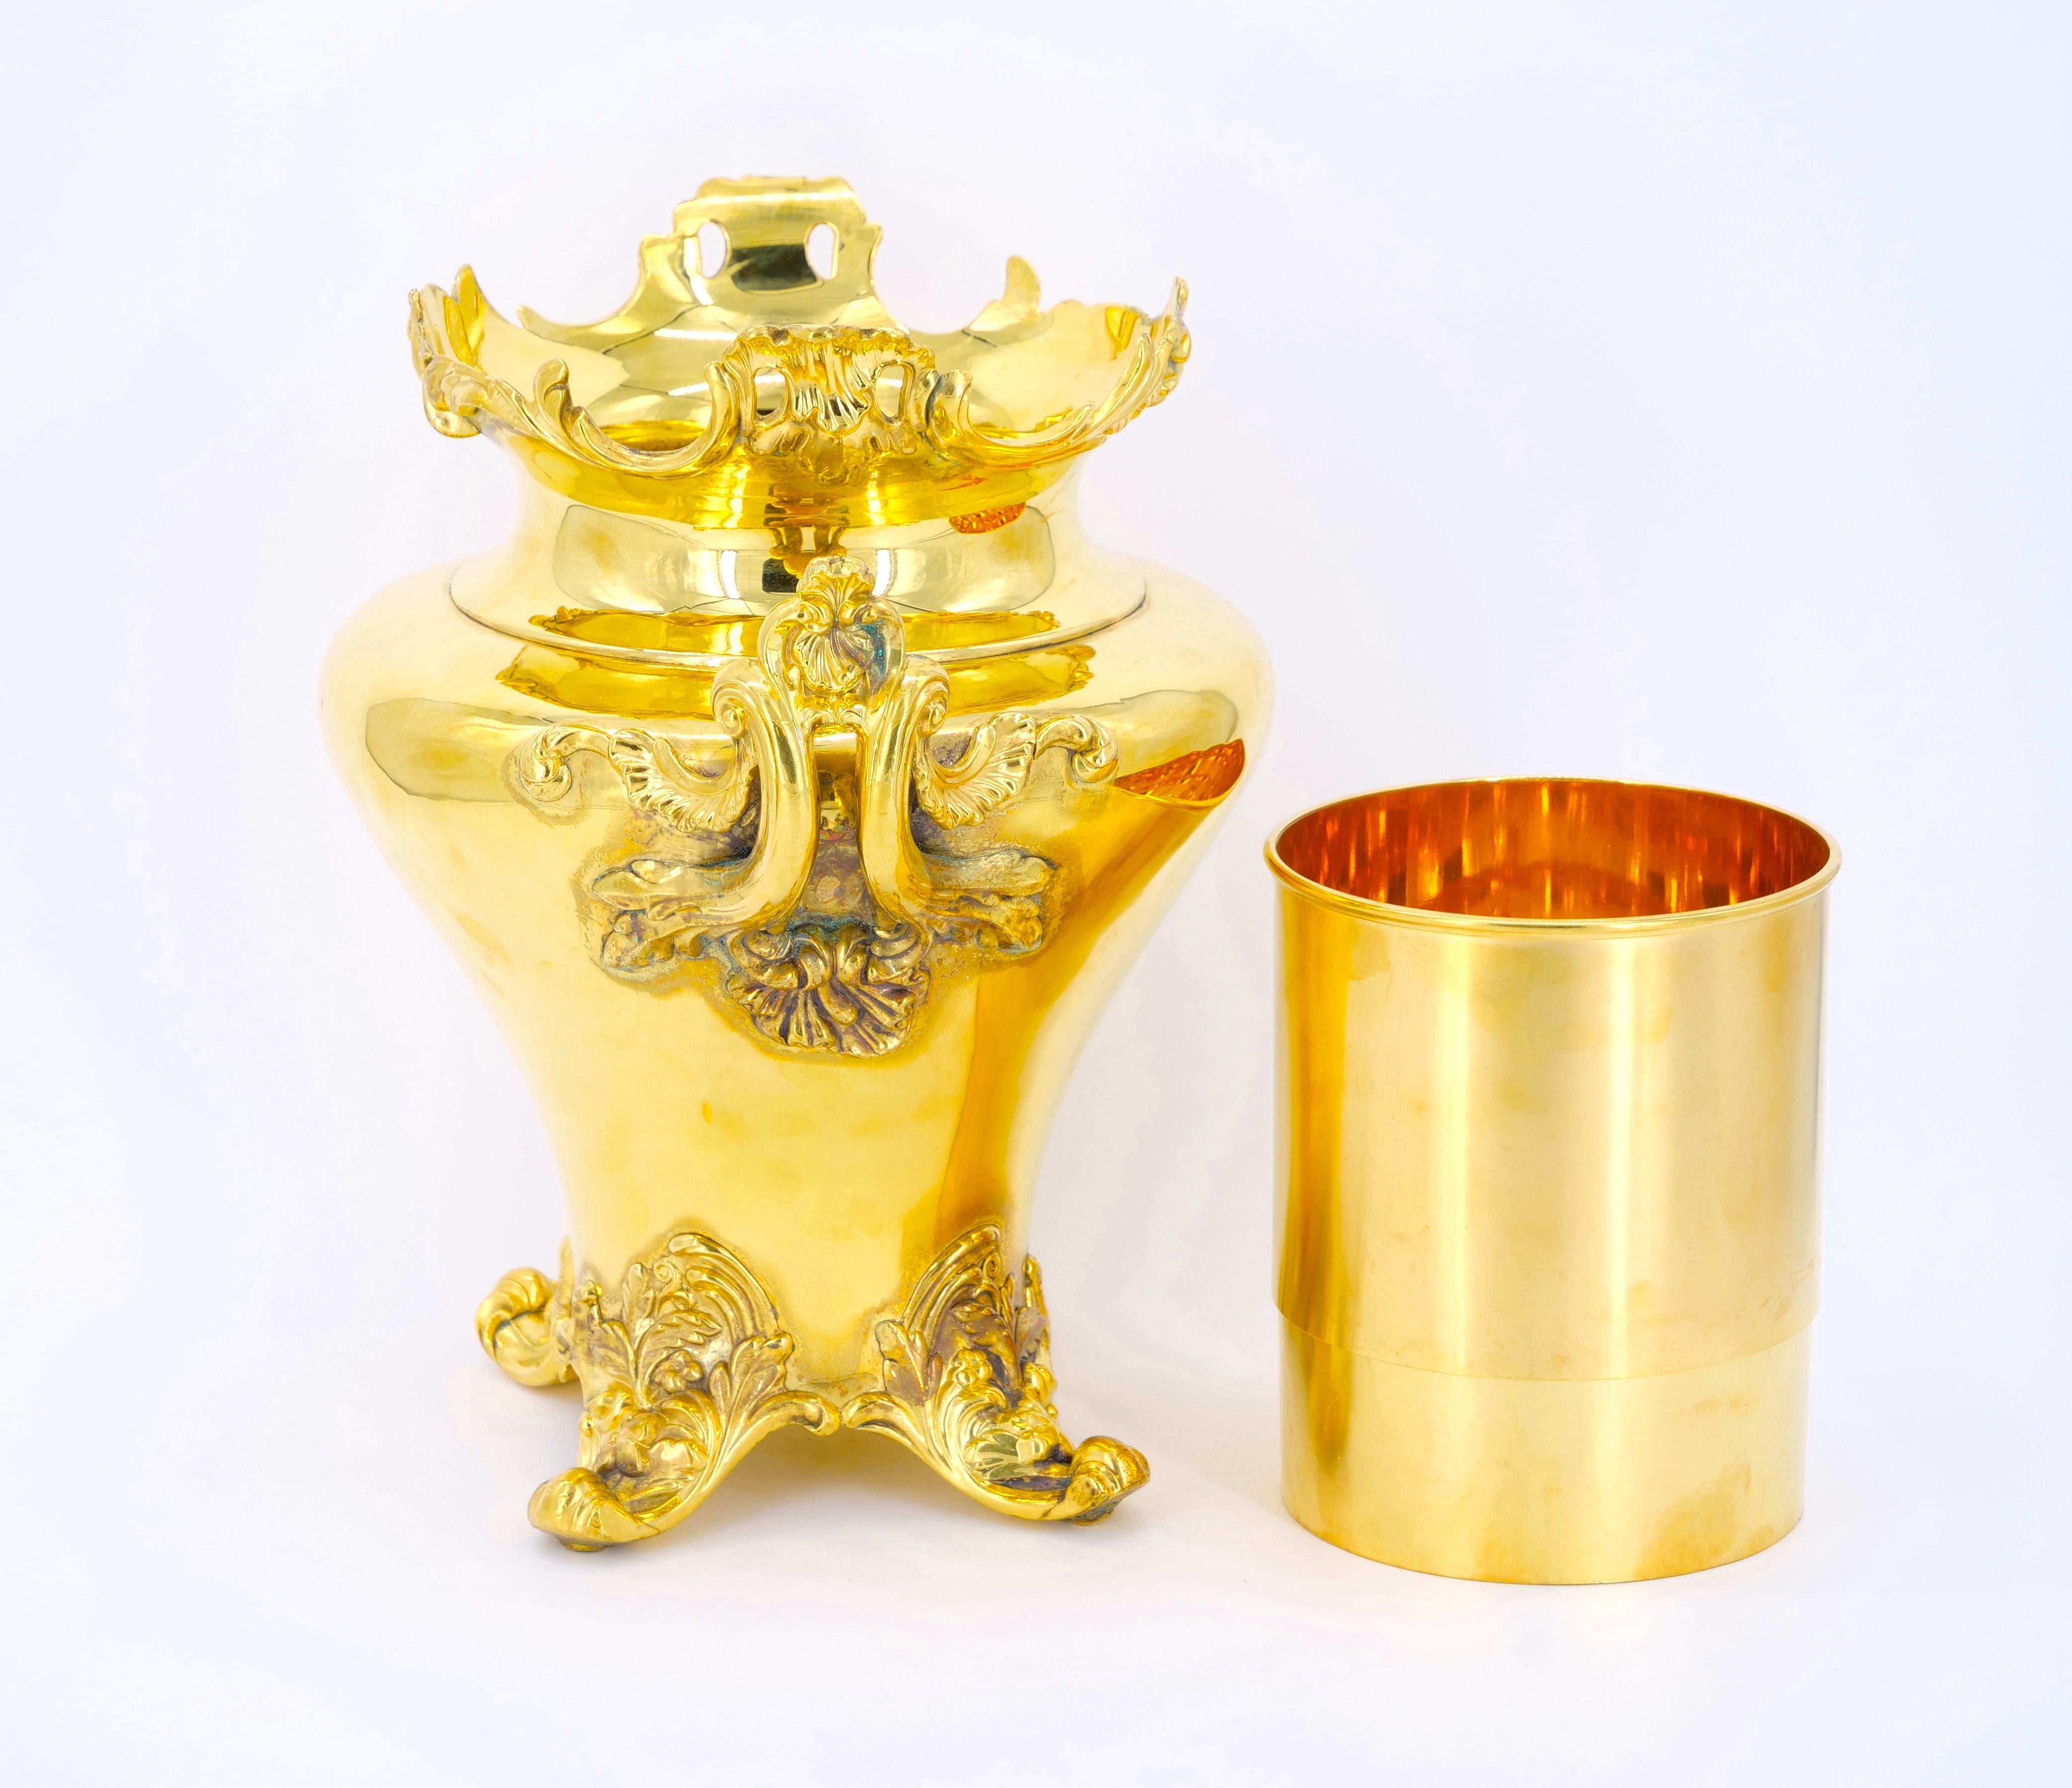 Elevate your entertaining with this exquisite Victorian Period English Gilt Silver Plate Champagne Cooler, a stunning piece of tableware and barware that exudes the opulence and elegance of the Victorian era. This champagne cooler is not just